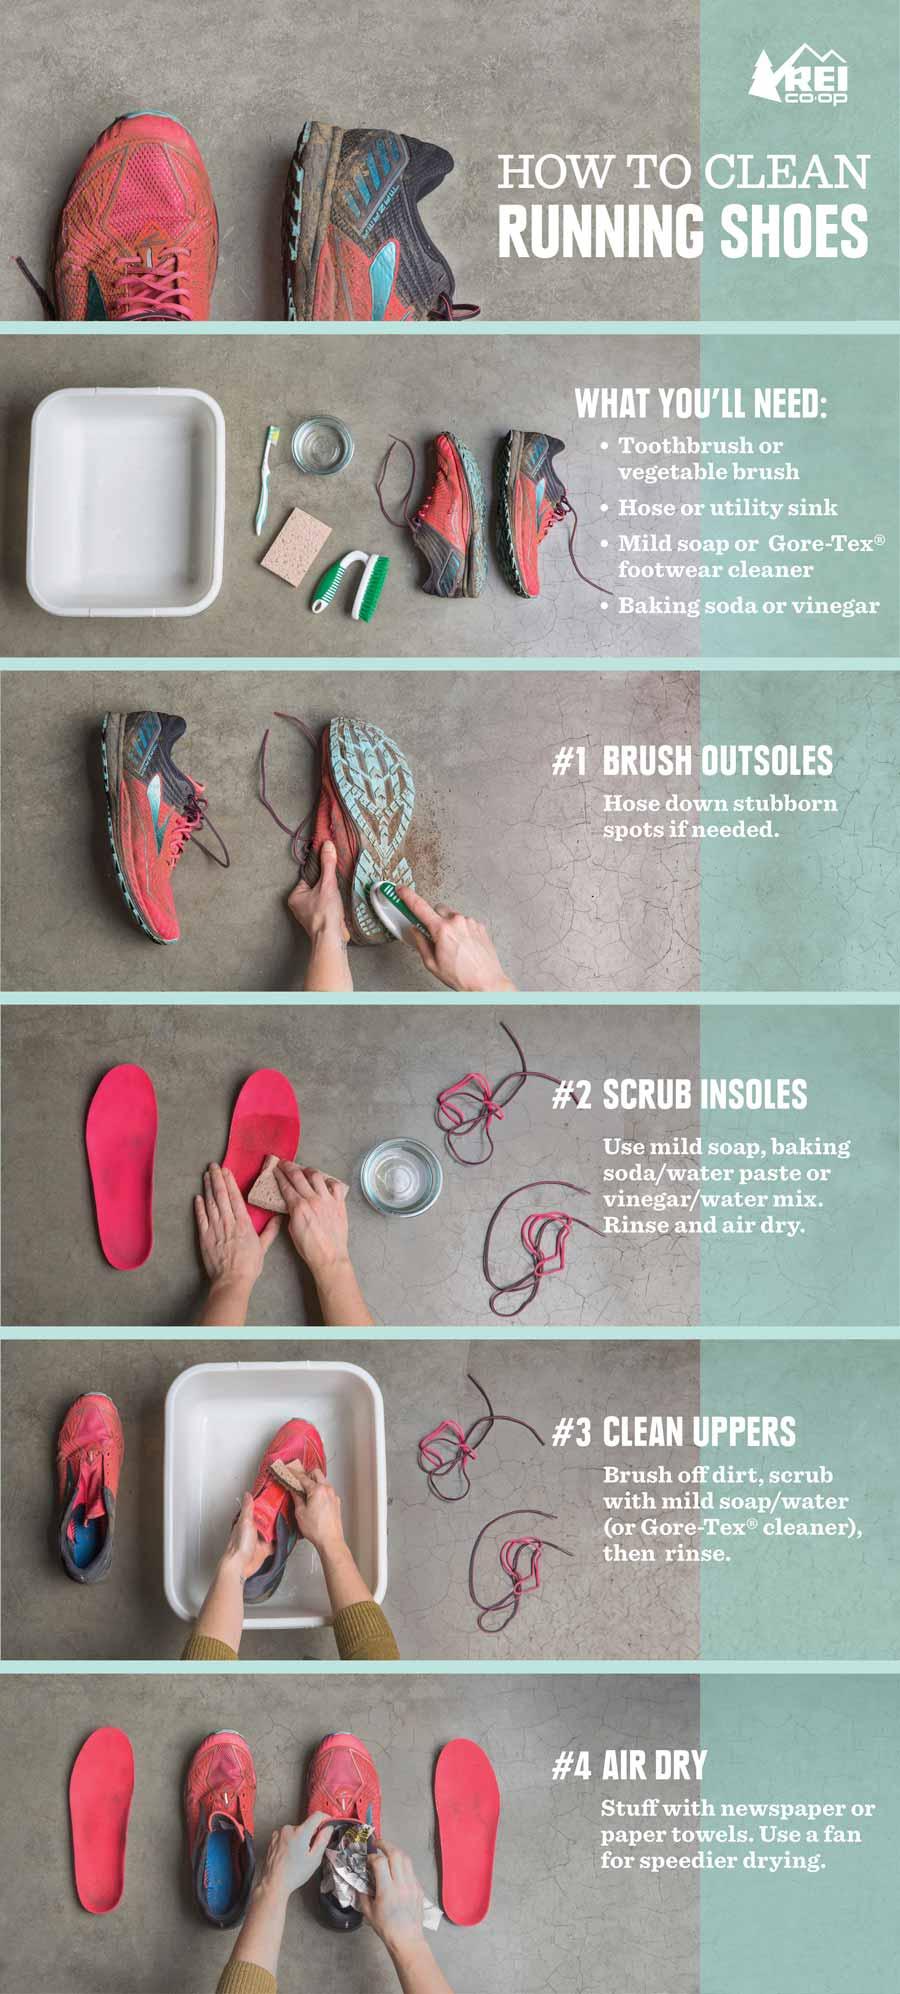 Do It Right: How to Wash Running Shoes